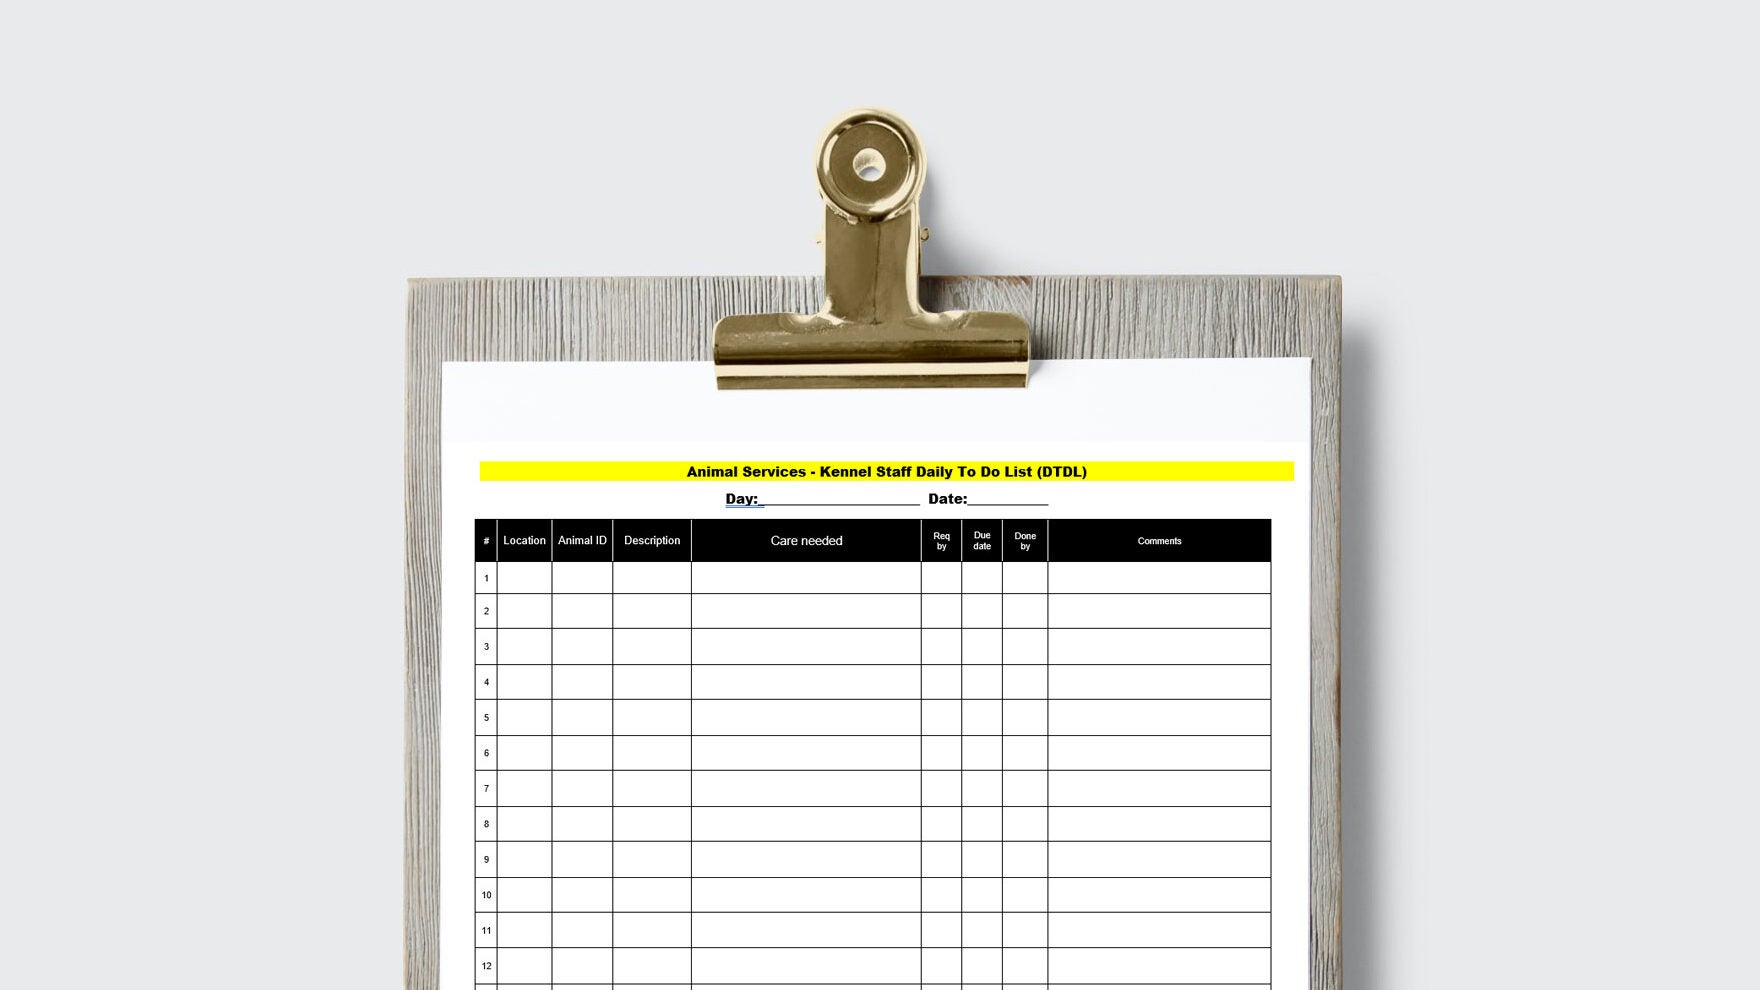 Blank daily rounds form on a clipboard